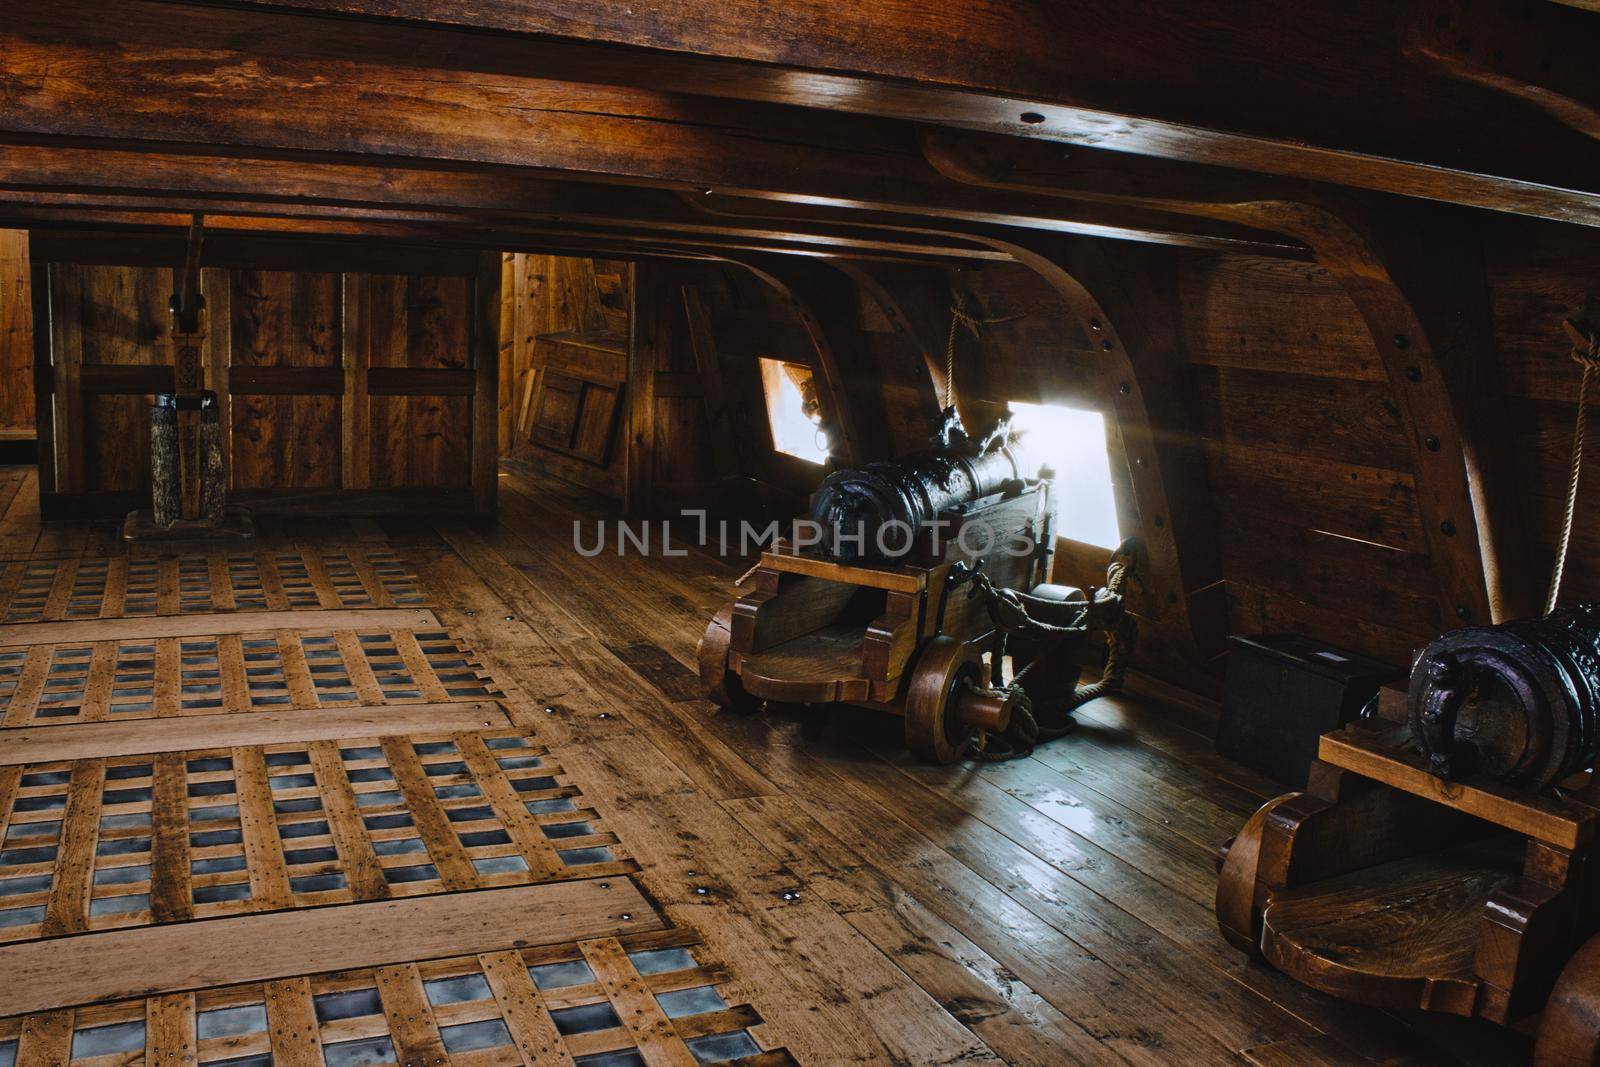 Stockholm, Sweden - 02/22/2019: Vasa museum, Stockholm - Interior of a gun deck on a recreation of the historic warship Vasa with cannons by tennesseewitney